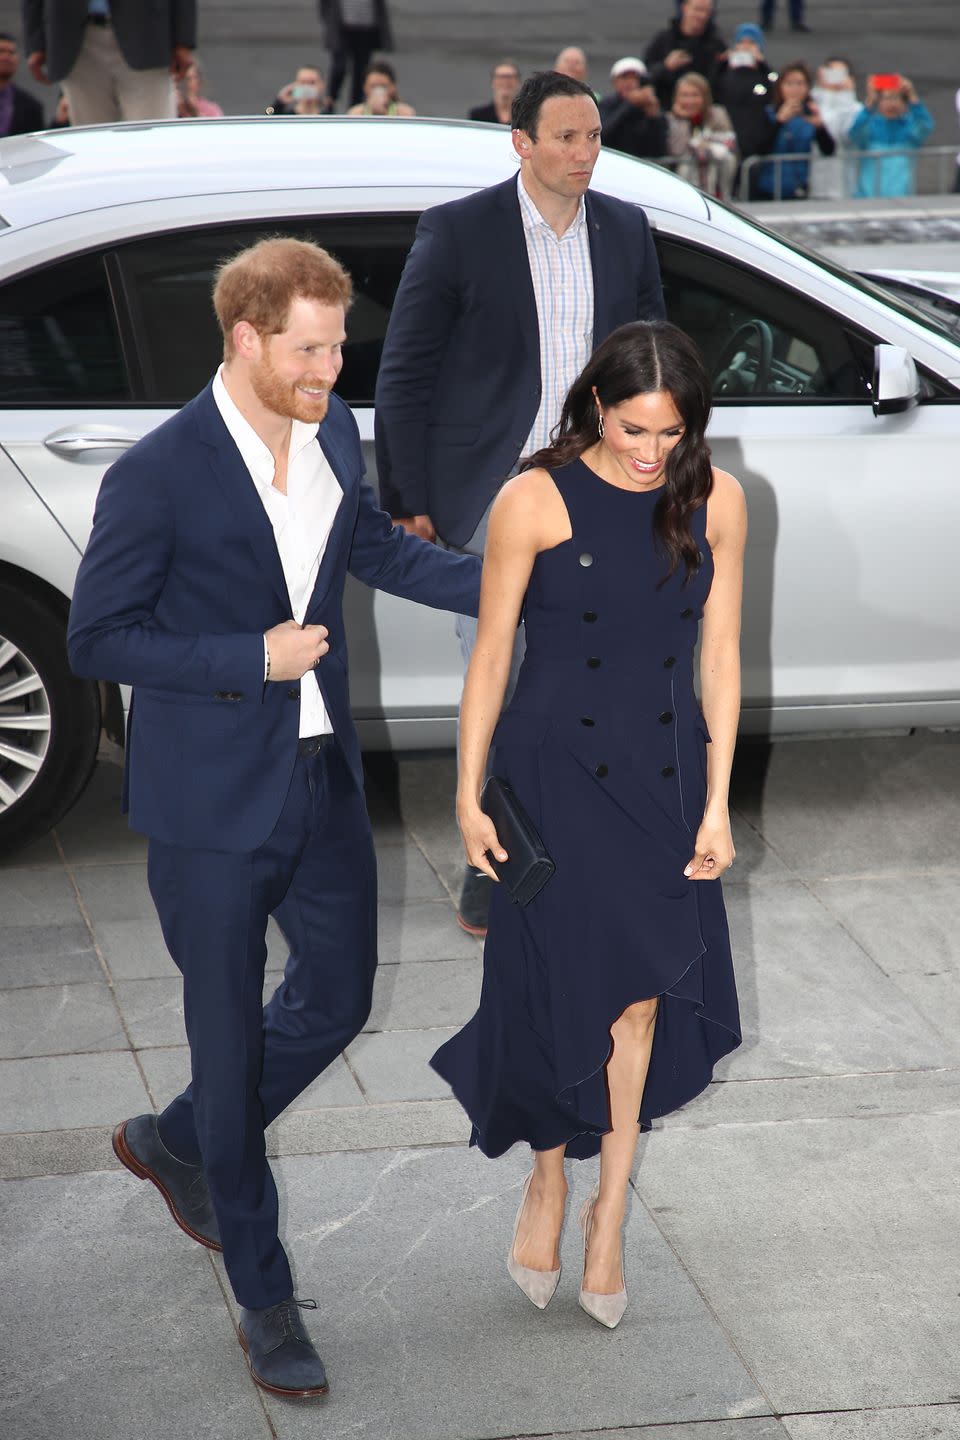 12) Meghan feels totally confident in what she has with Harry.